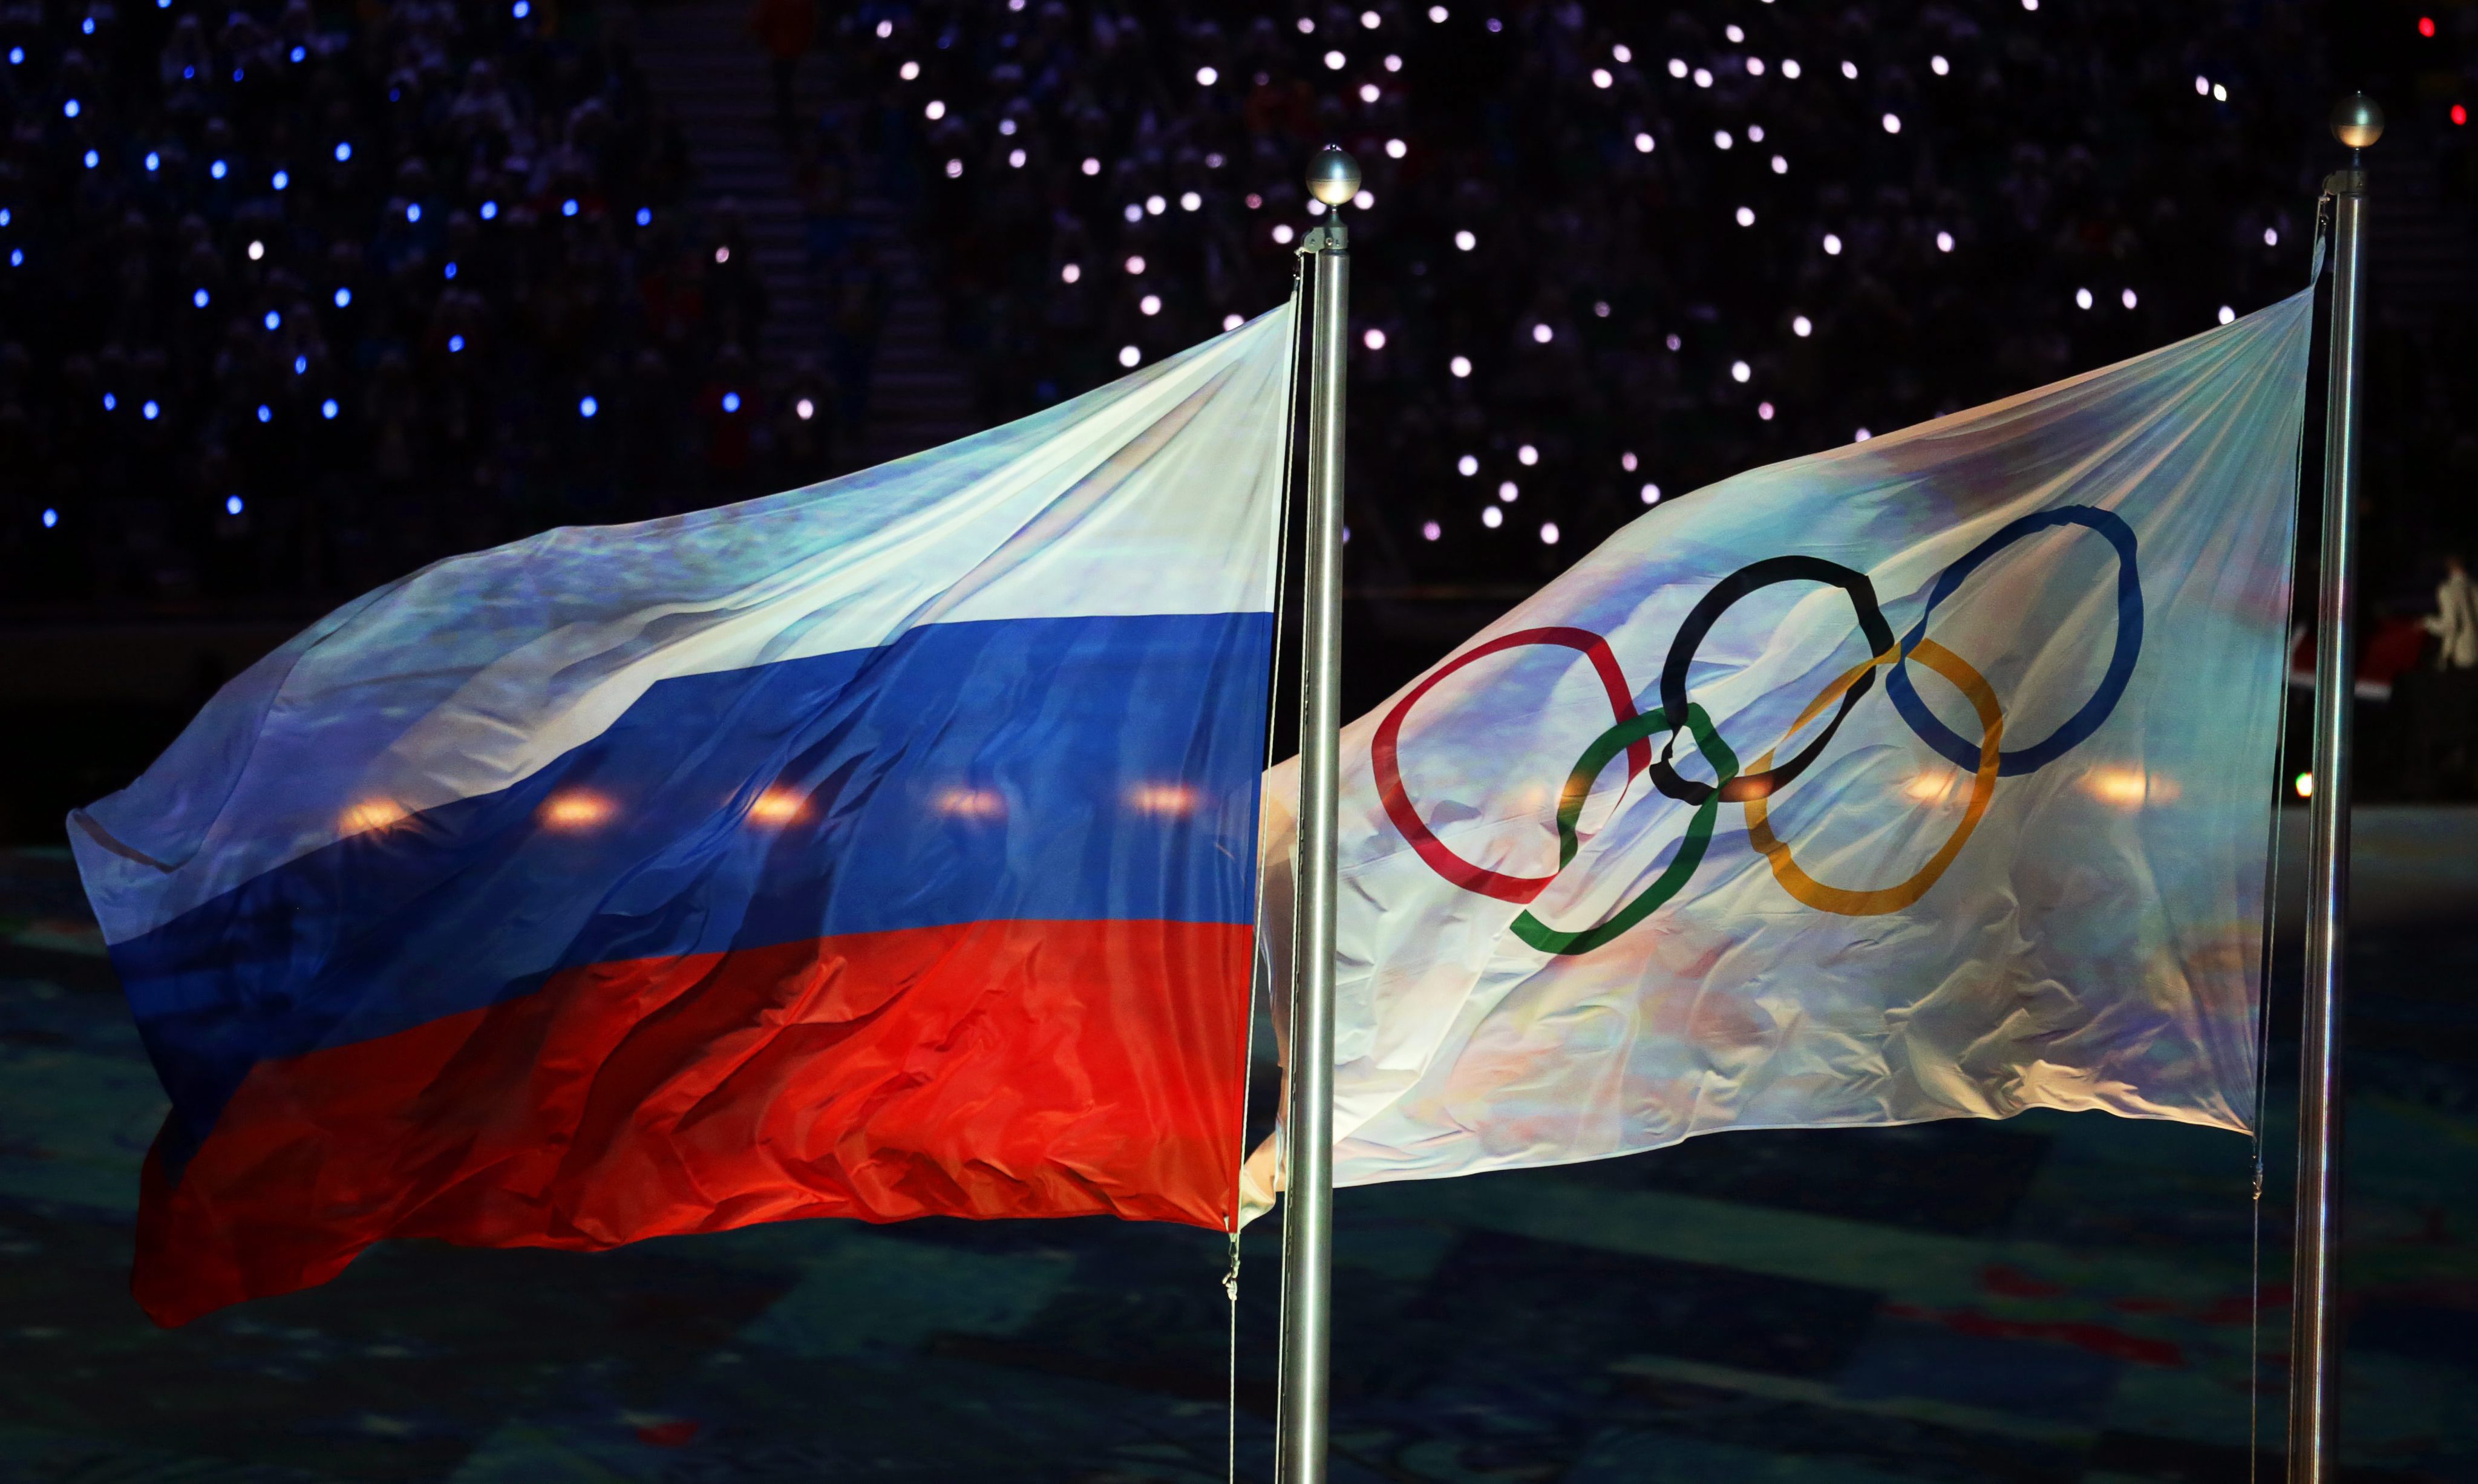 Russia could now find itself banned from participating at the 2016 Olympic Games in Rio. Photo: EPA